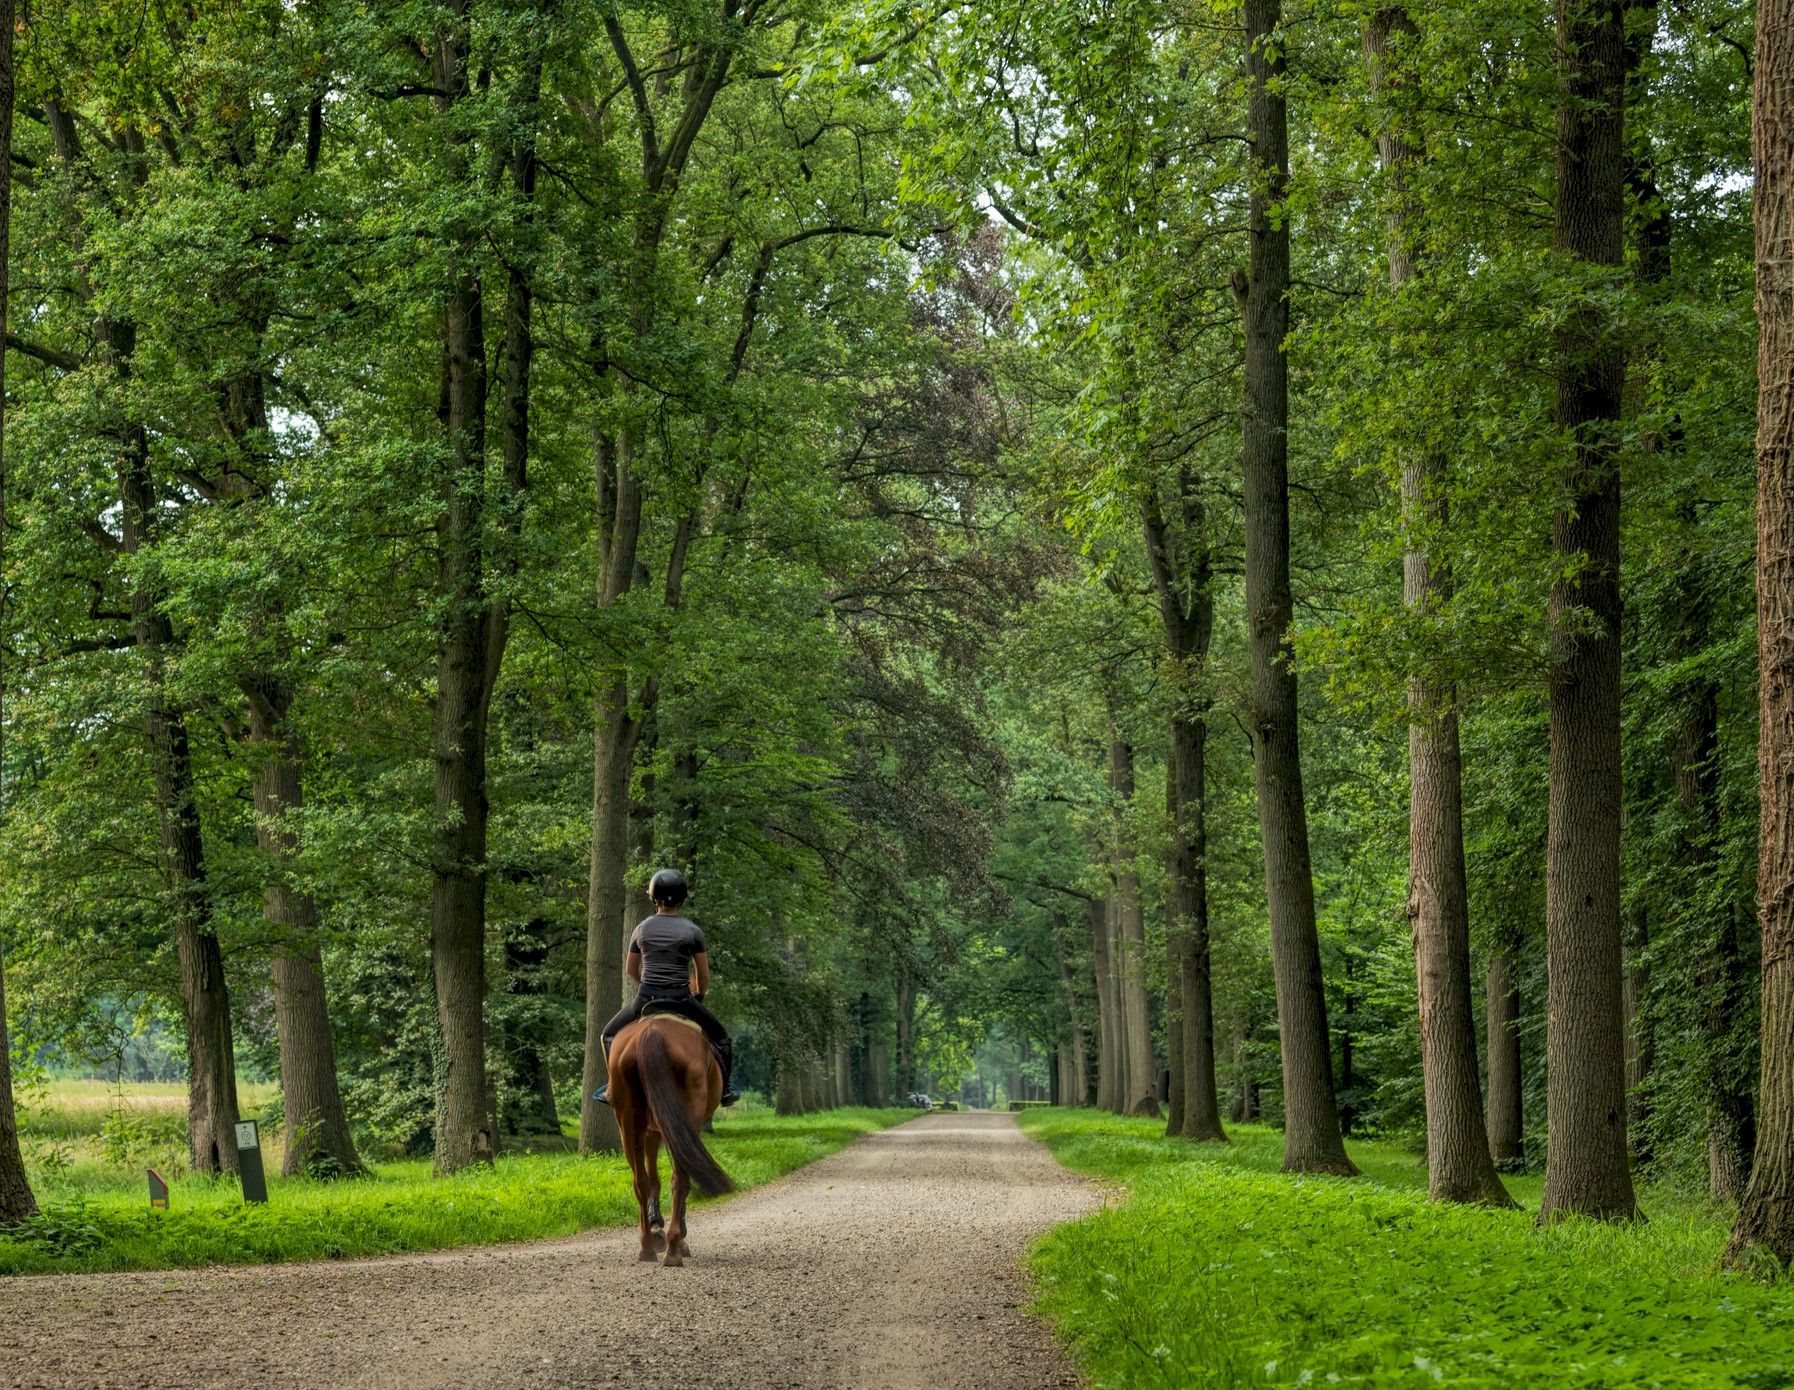 A woman horseback riding in the forest